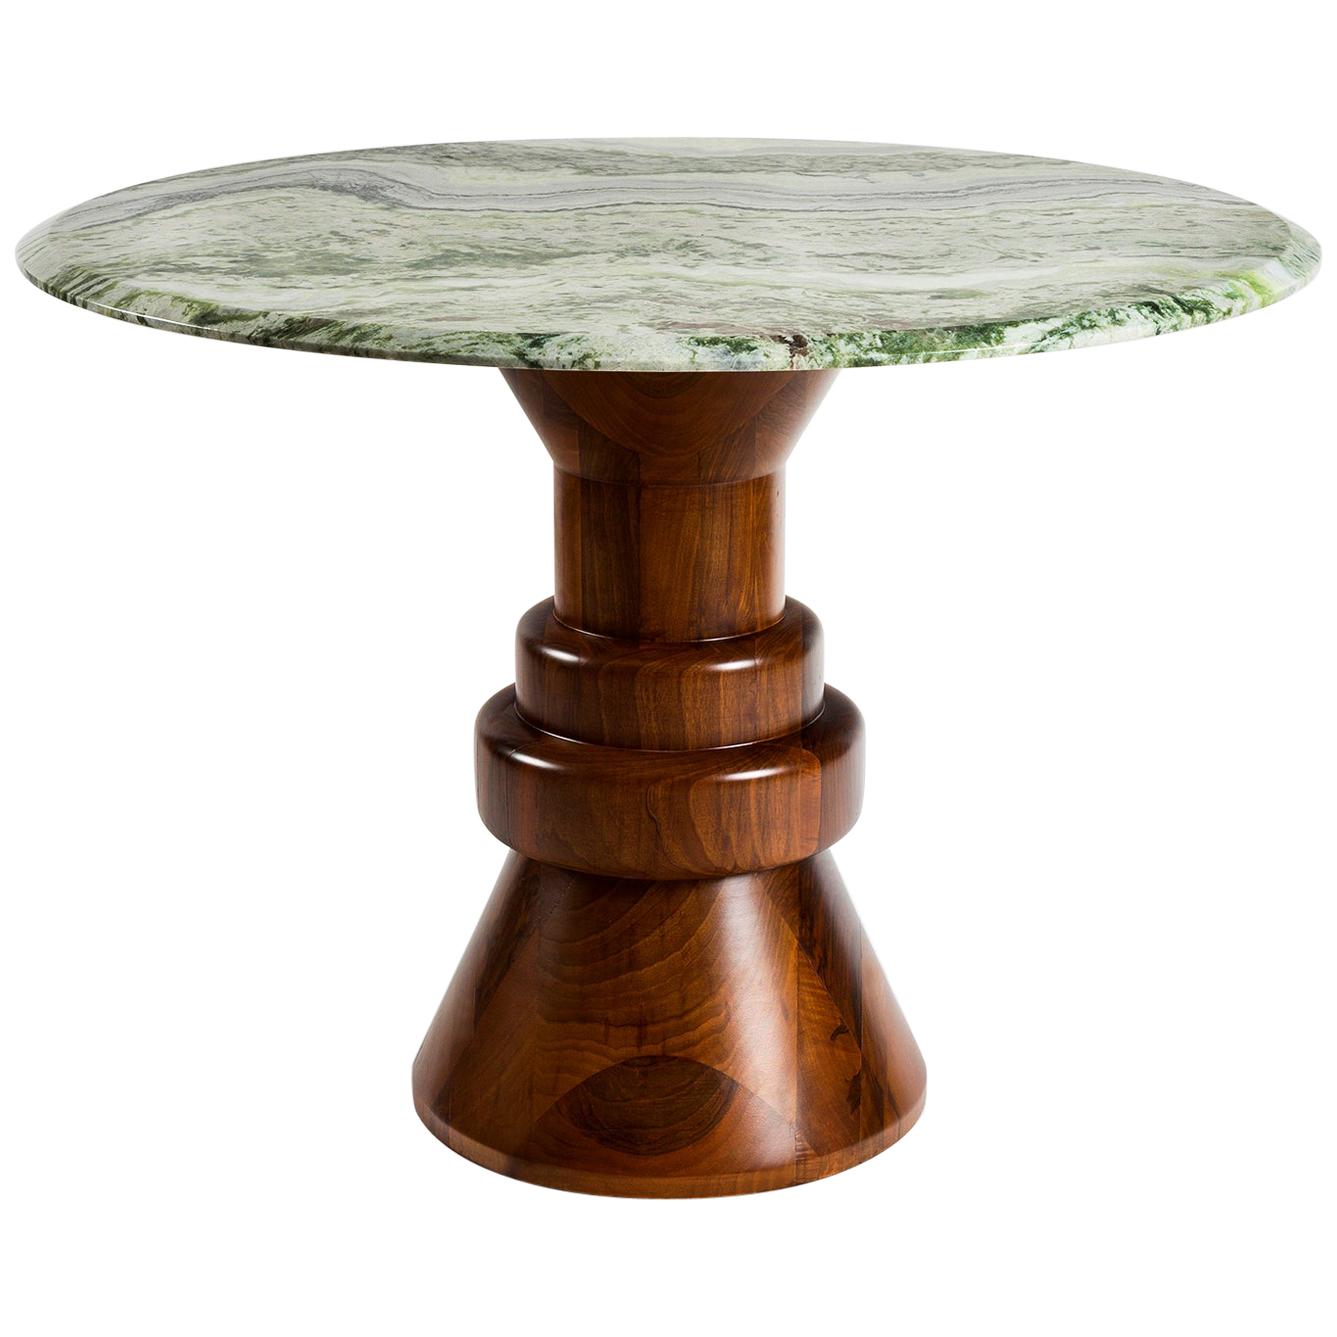 This playful handcrafted dining table is perfect to accommodate 4 people in smaller spaces. Cream/gray marble top is combined with sculptural black finished wooden base and can be customized in different sizes and marble tops.